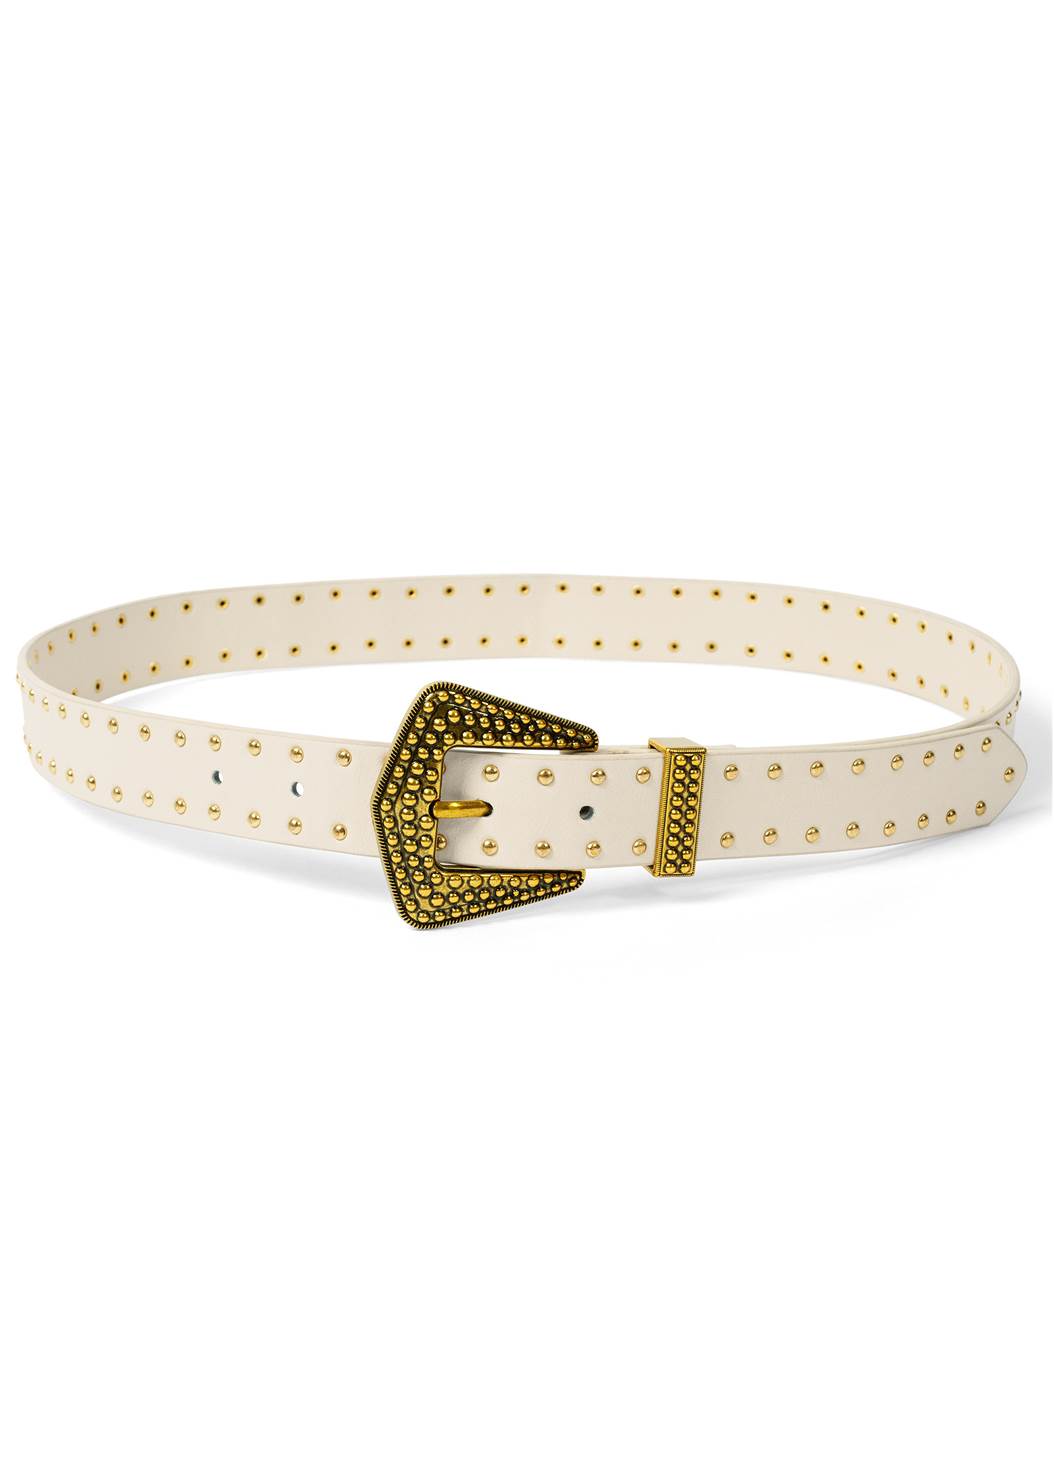 Studded Faux-Leather Belt in Gold & Ivory | VENUS